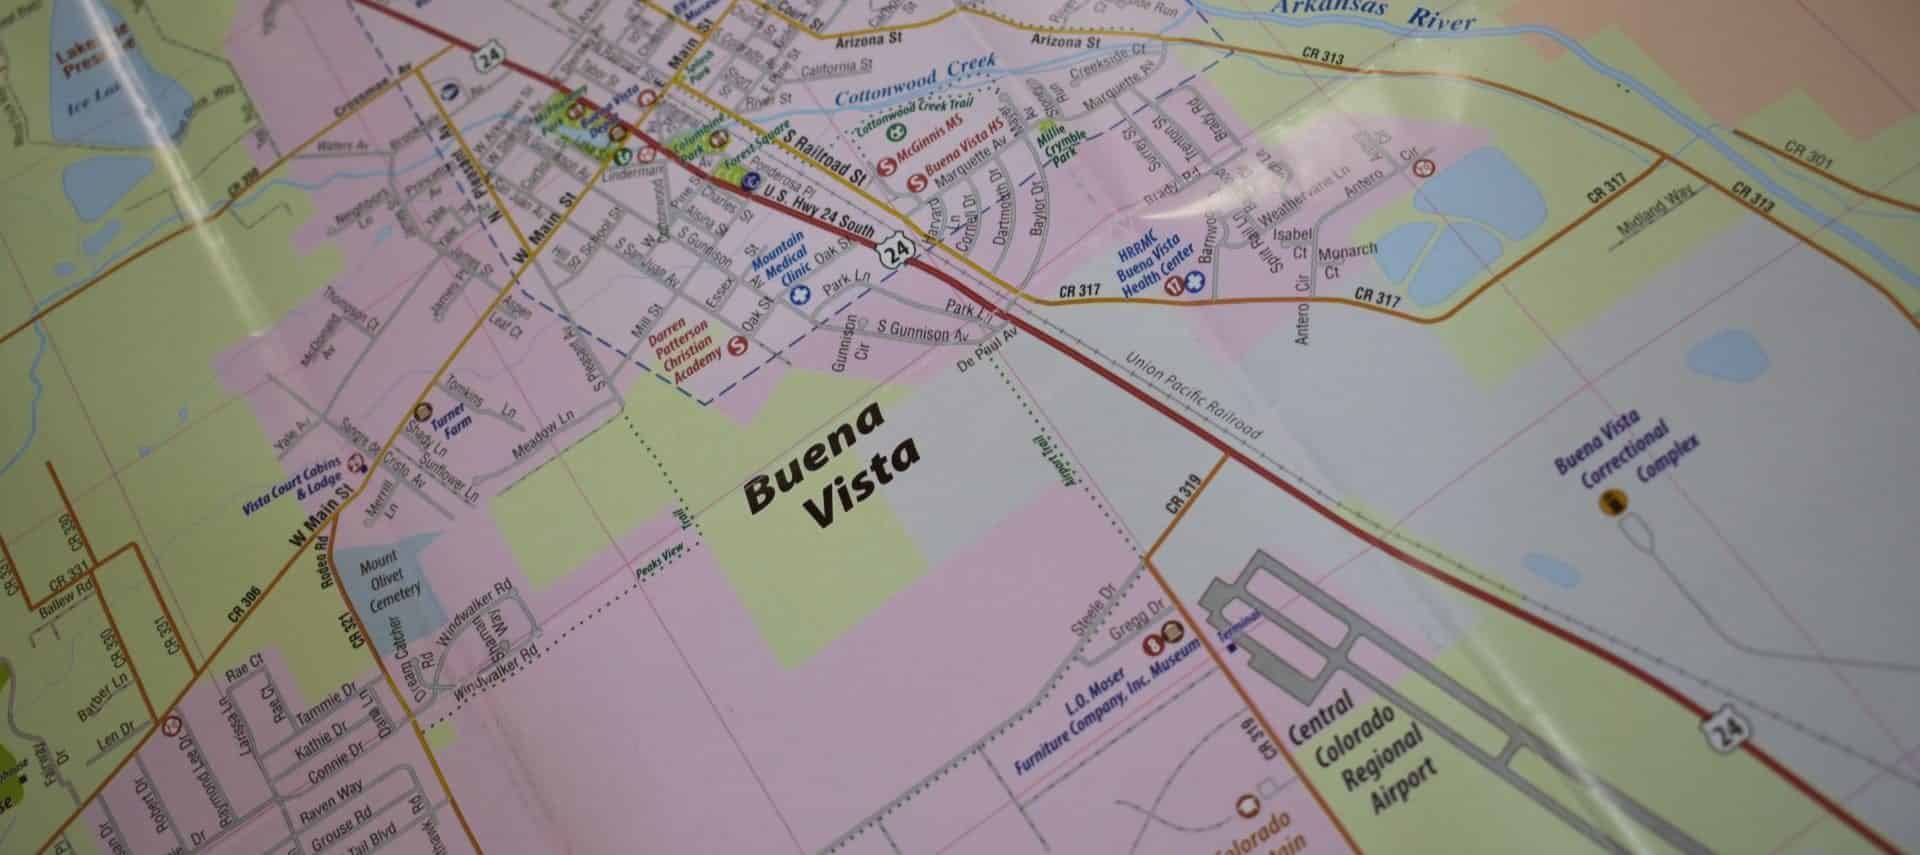 Close up view of a map of Buena Vista